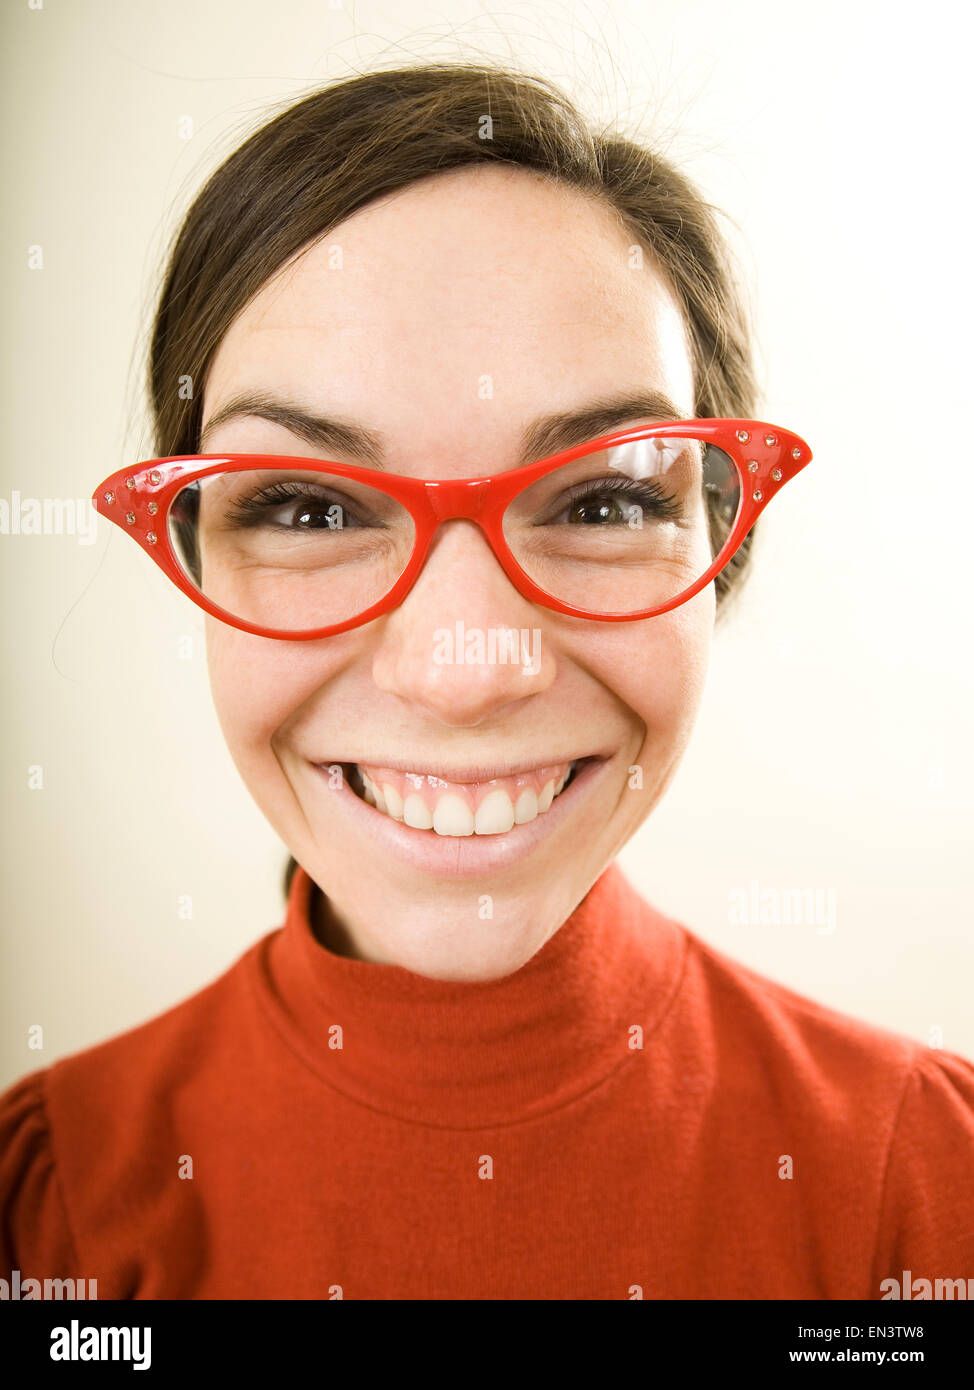 woman smiling wearing horn rimmed glasses Stock Photo